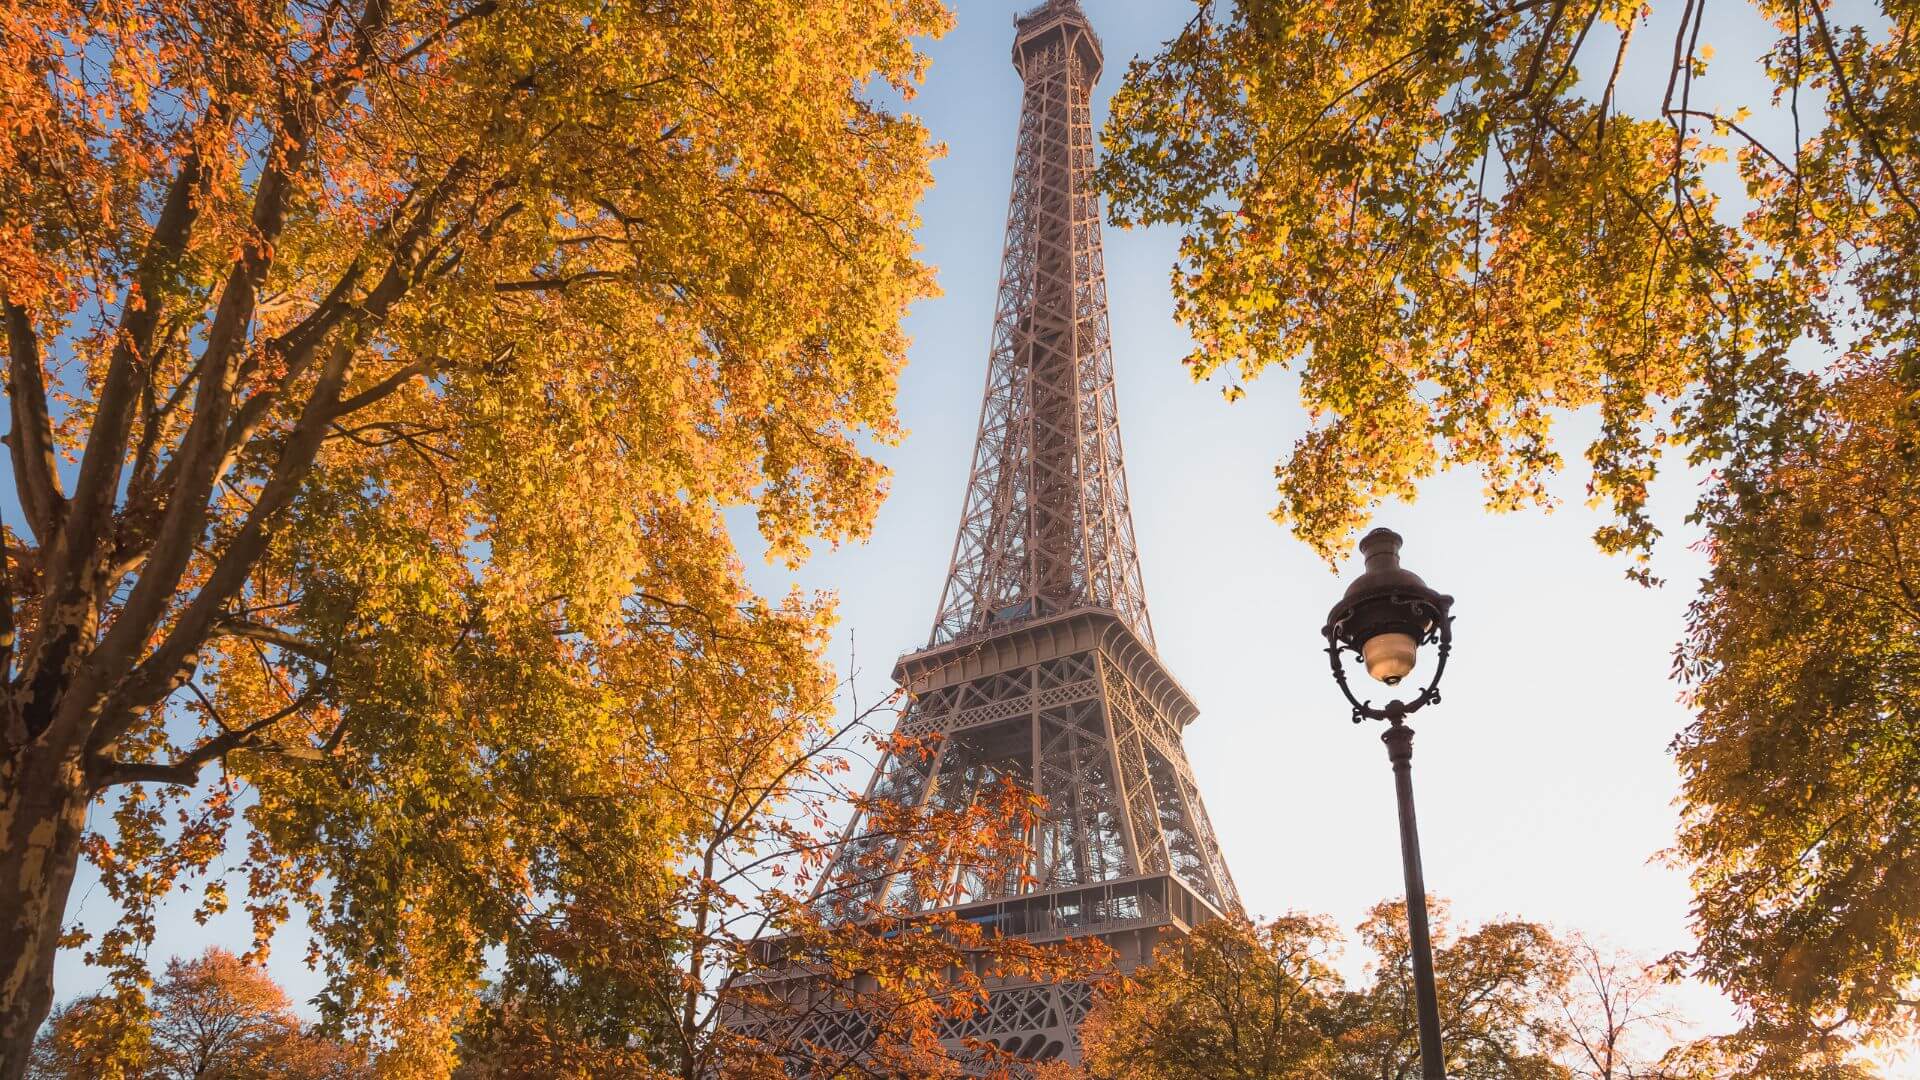 The Eiffel Tower in Autumn Colors